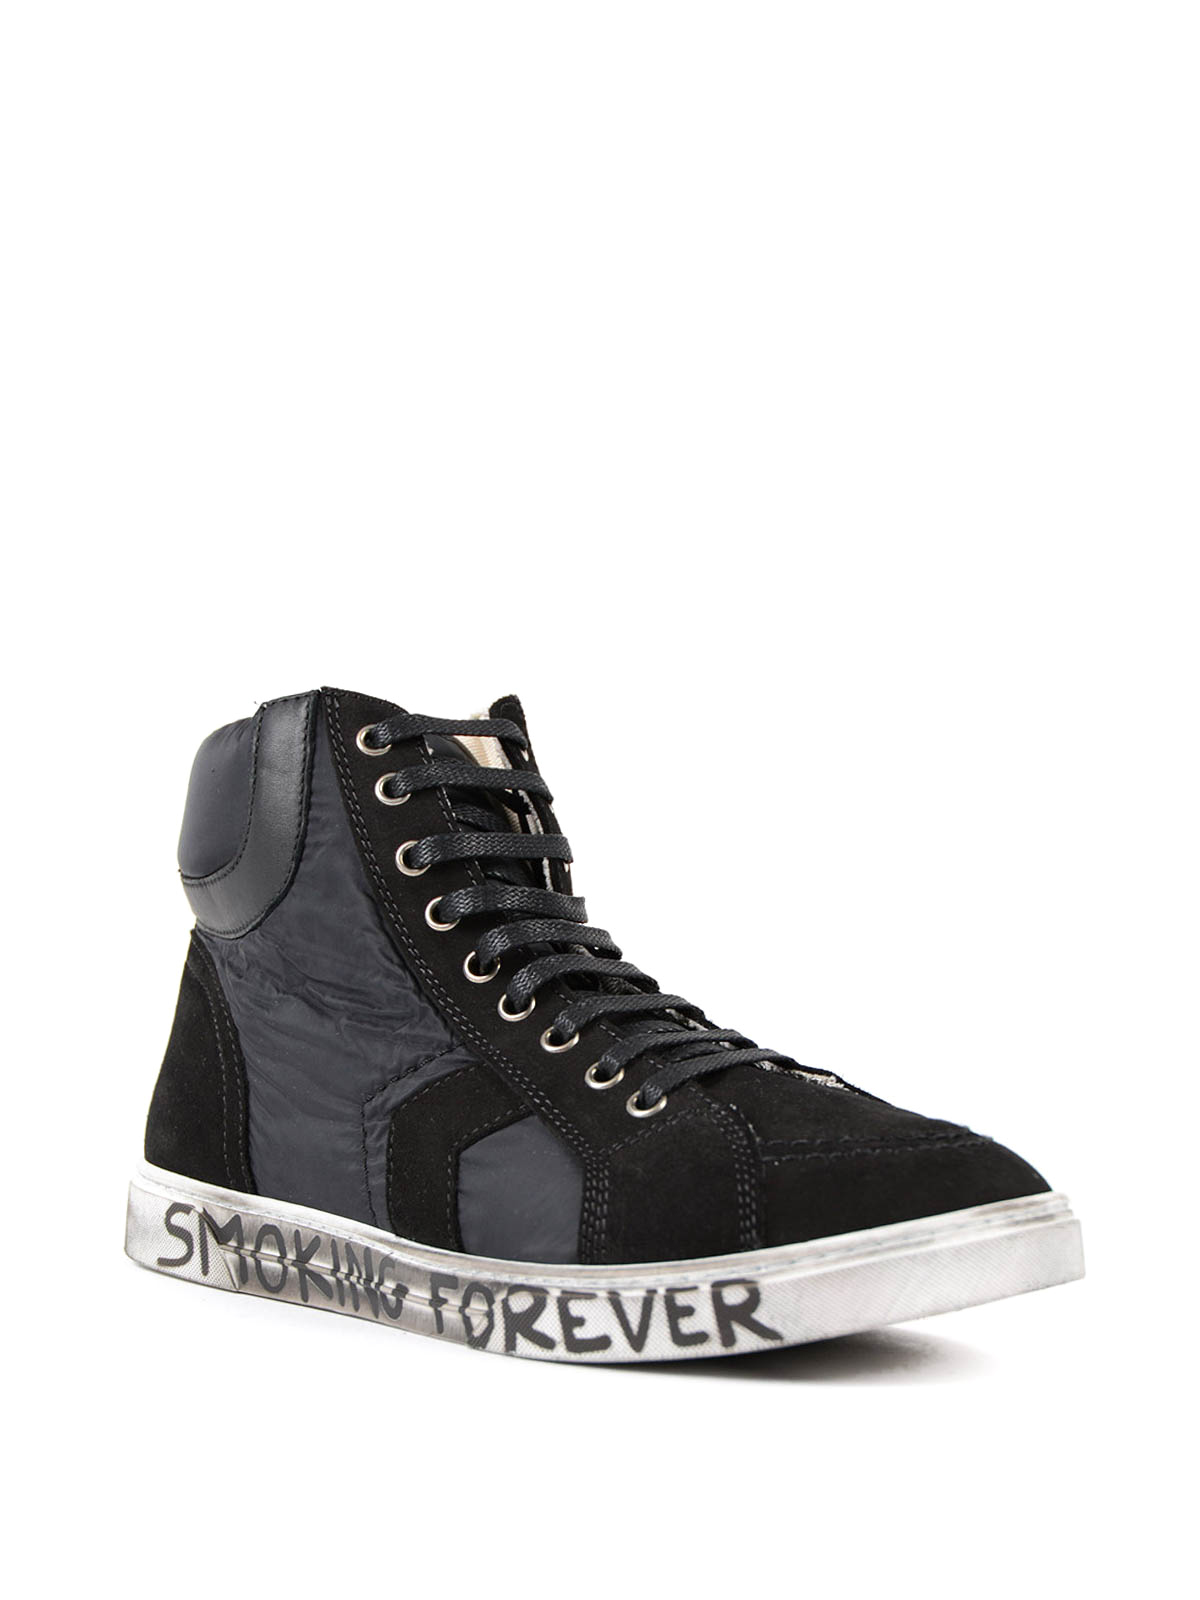 Trainers Saint Laurent - Suede and nylon sneakers - 487193D5XB01000